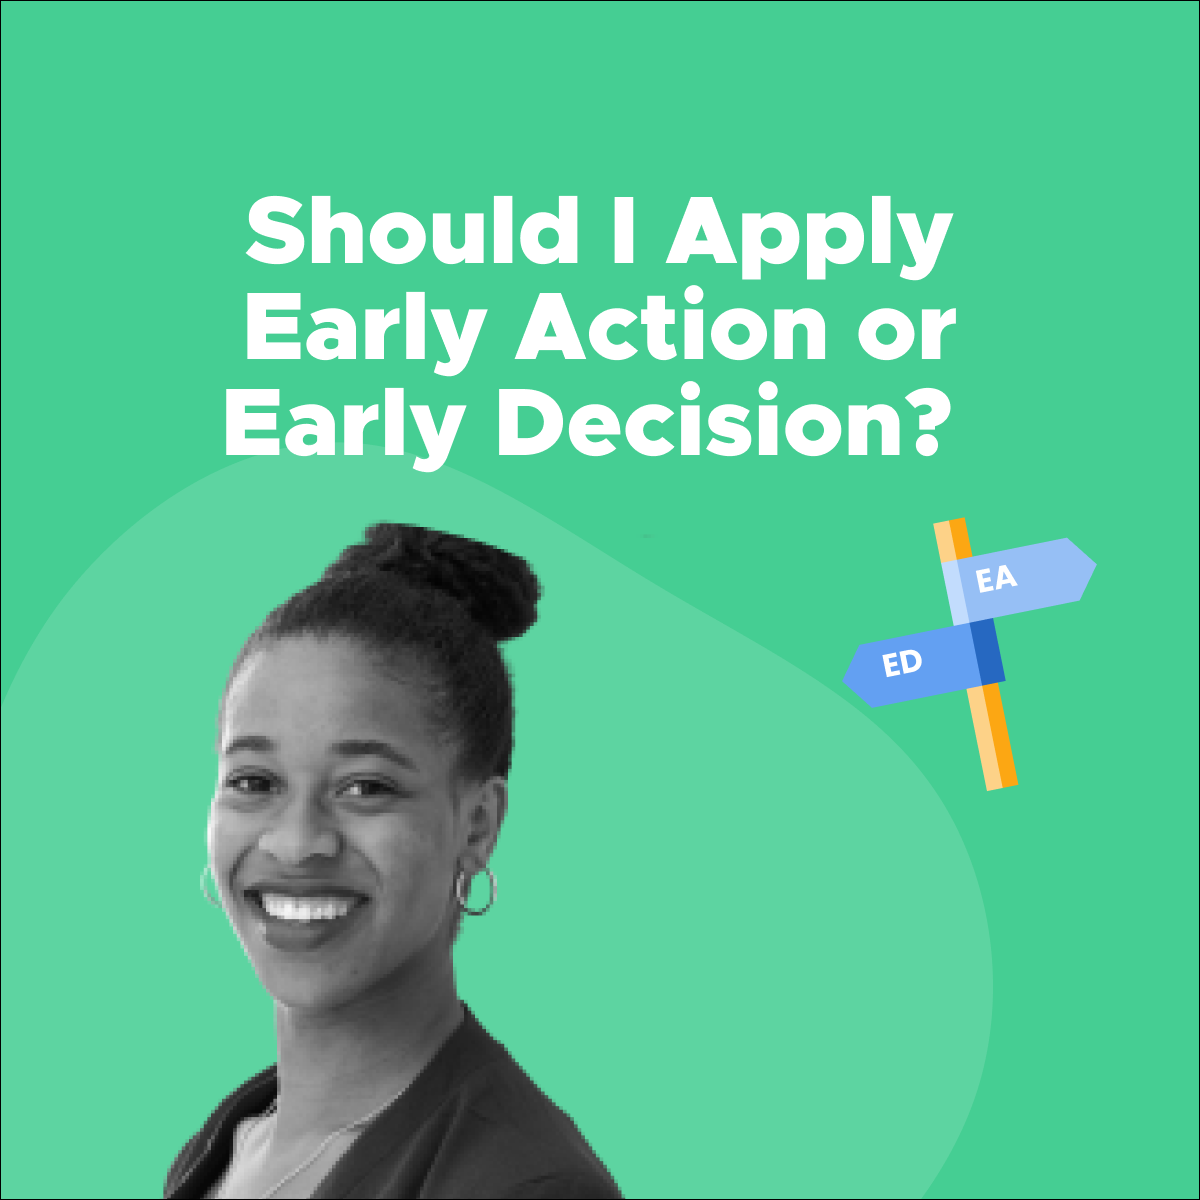 Admissions Officer Advice Should I Apply Early Action or Early Decision?